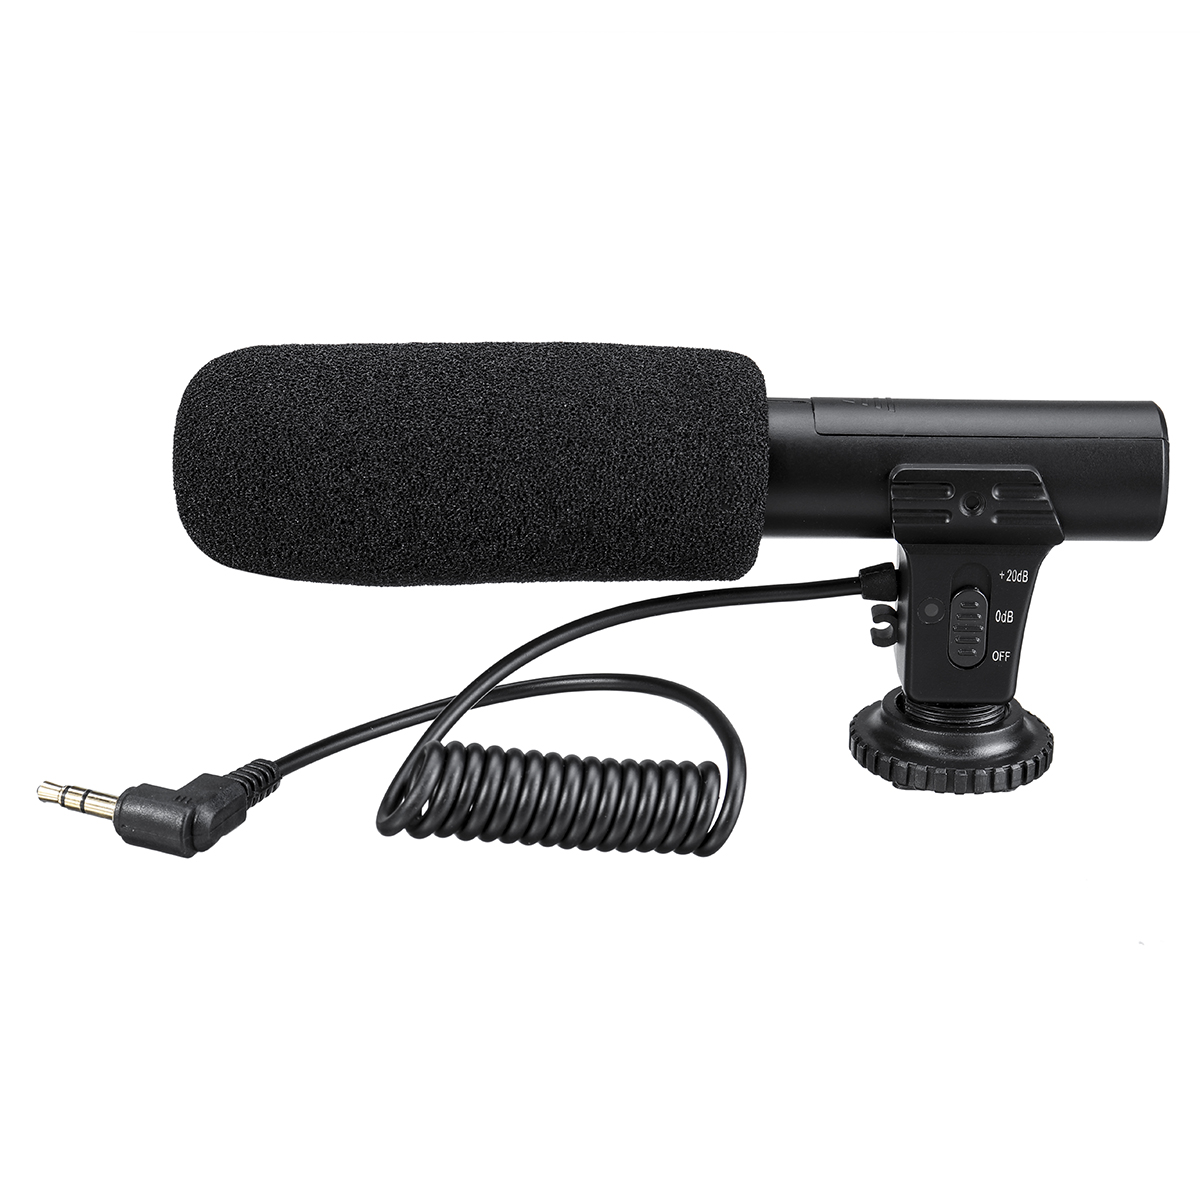 35mm-External-Stereo-Microphone-MIC-for-Canon-DSLR-Camera-DV-Camcorder-1653411-2